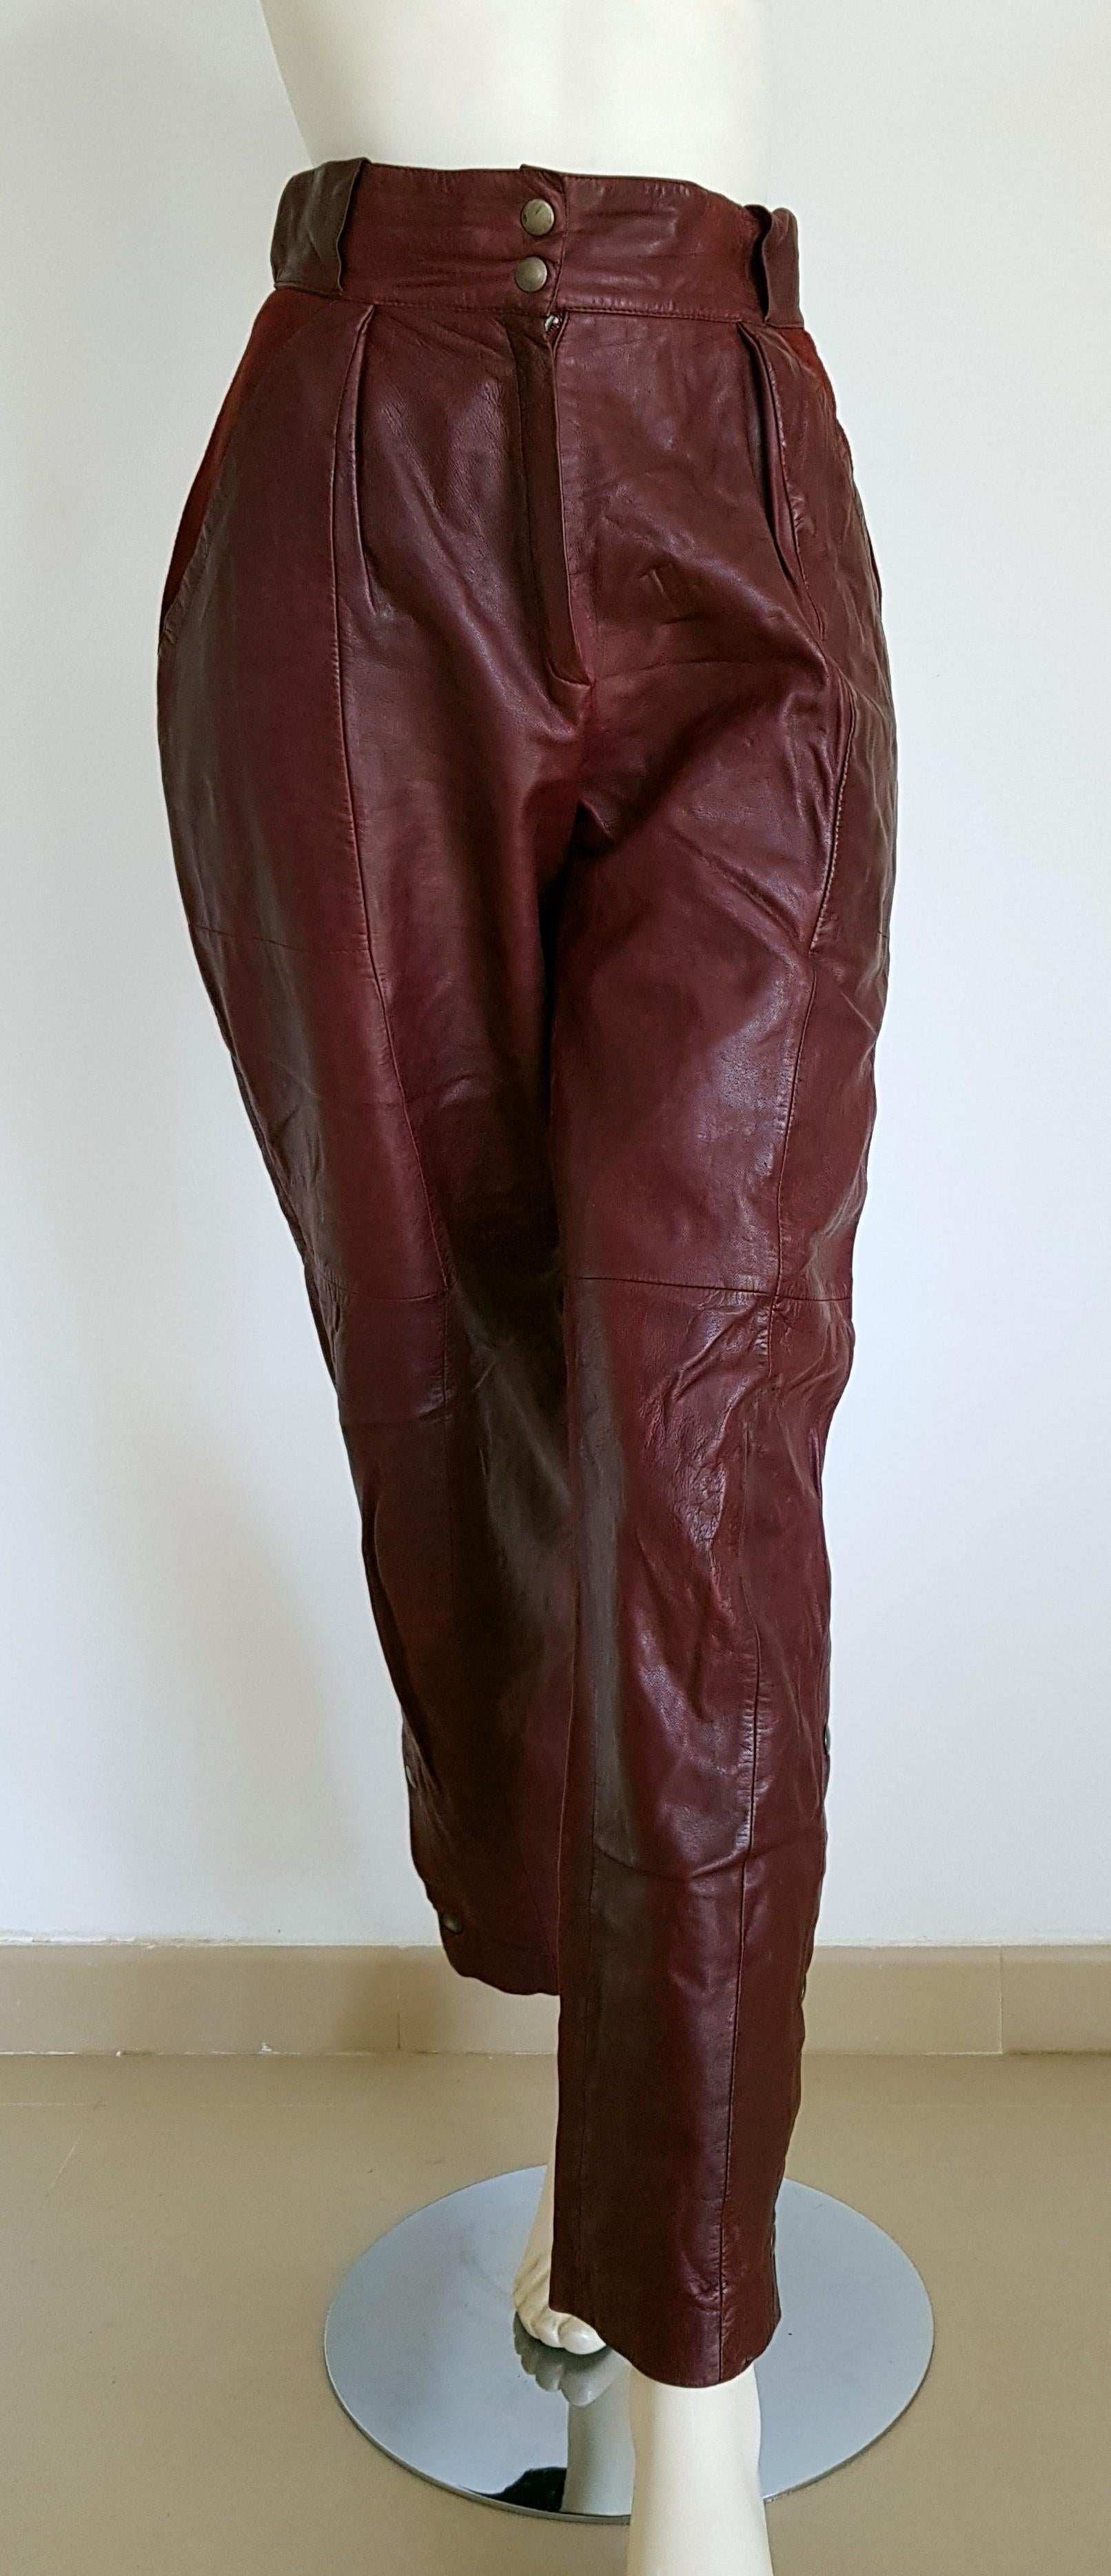 Claude MONTANA burgundy lamb leather pants - Unworn, Good condition

SIZE: equivalent to about Small / Medium, please review approx measurements as follows in cm. 
PANTS: lenght 101, inseam length 72, waist circumference 74, hip circumference 97,